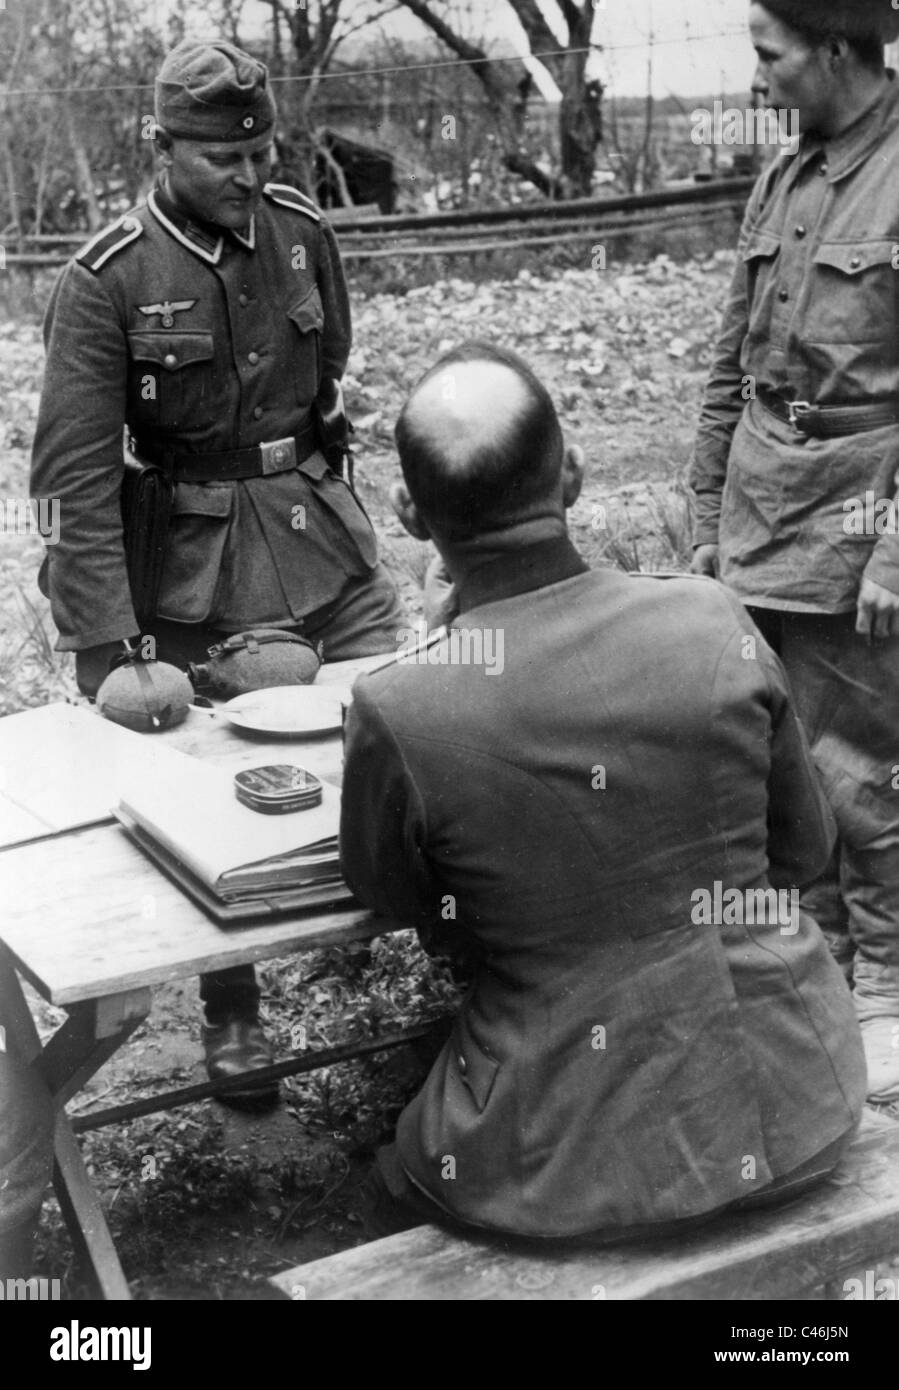 Second World War, Russian Prisoners of War being interrogated by German soldiers Stock Photo